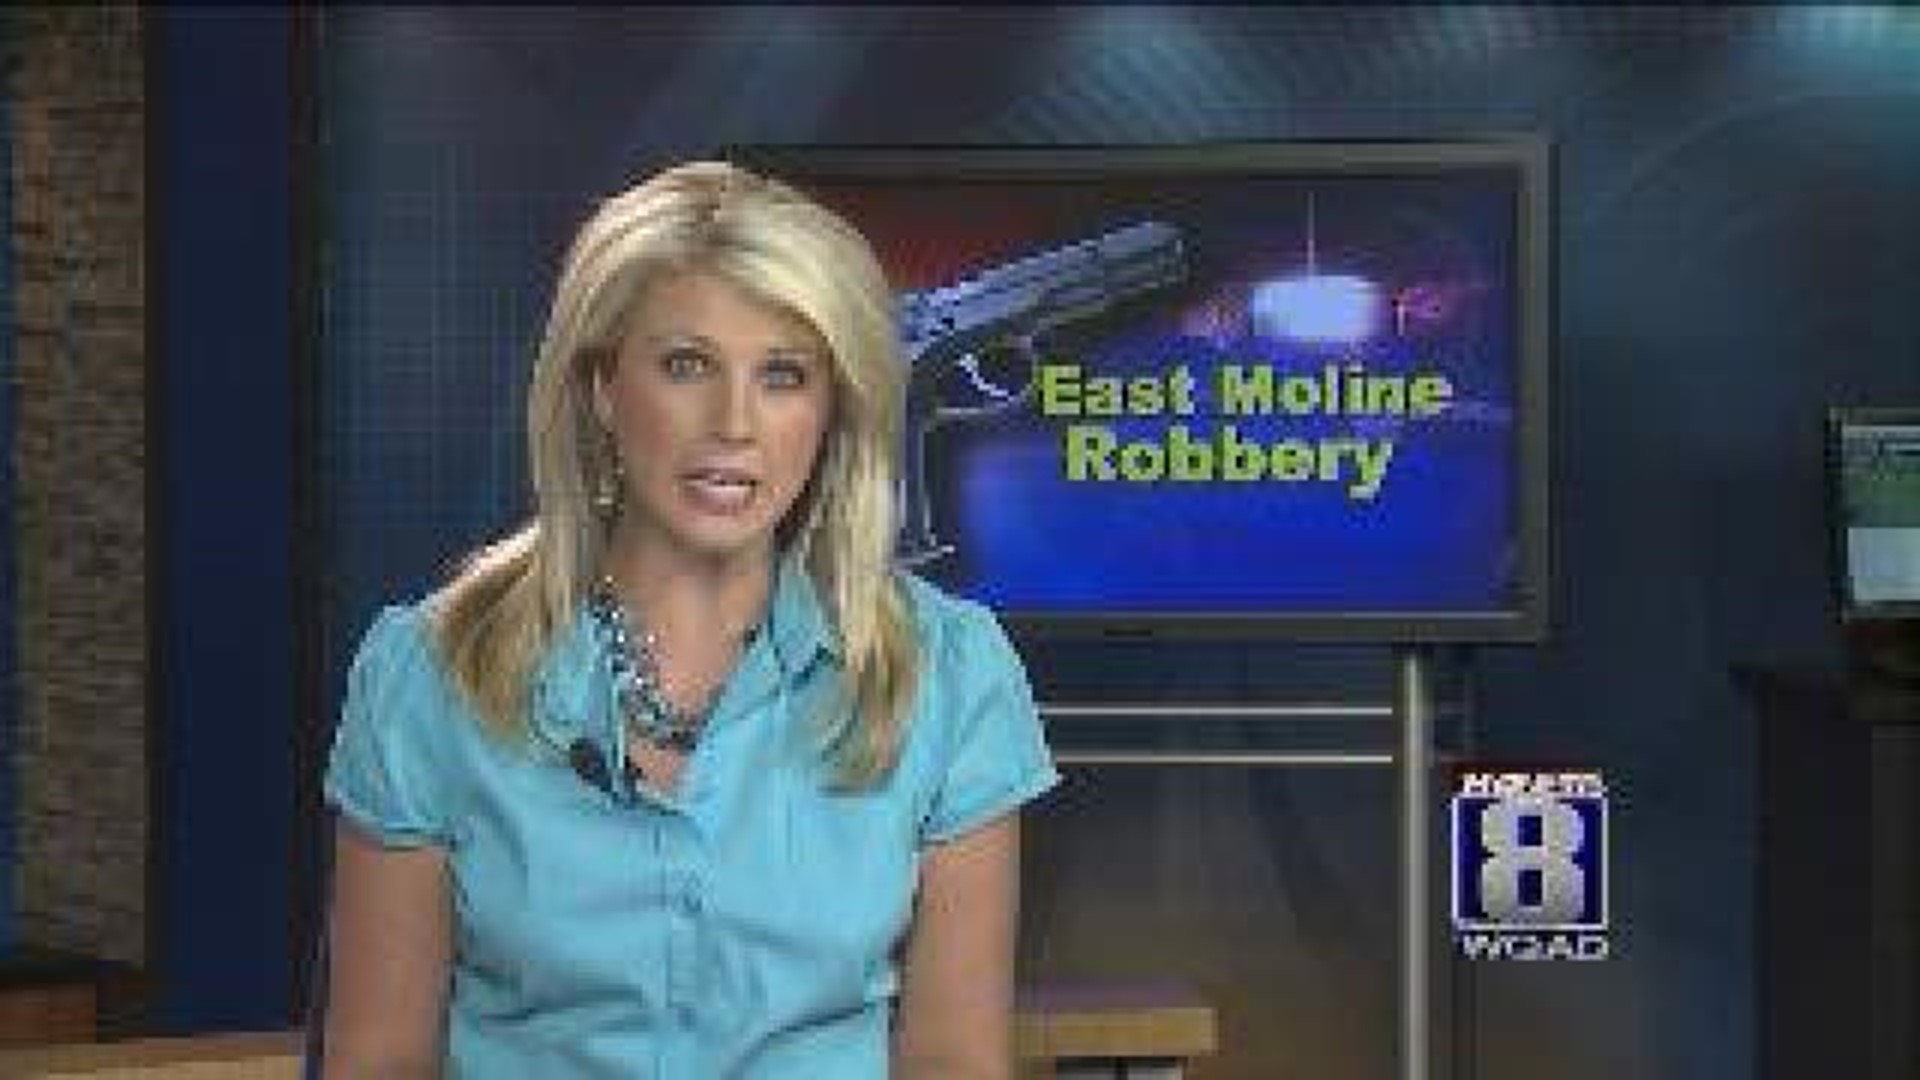 Moline armed robbery